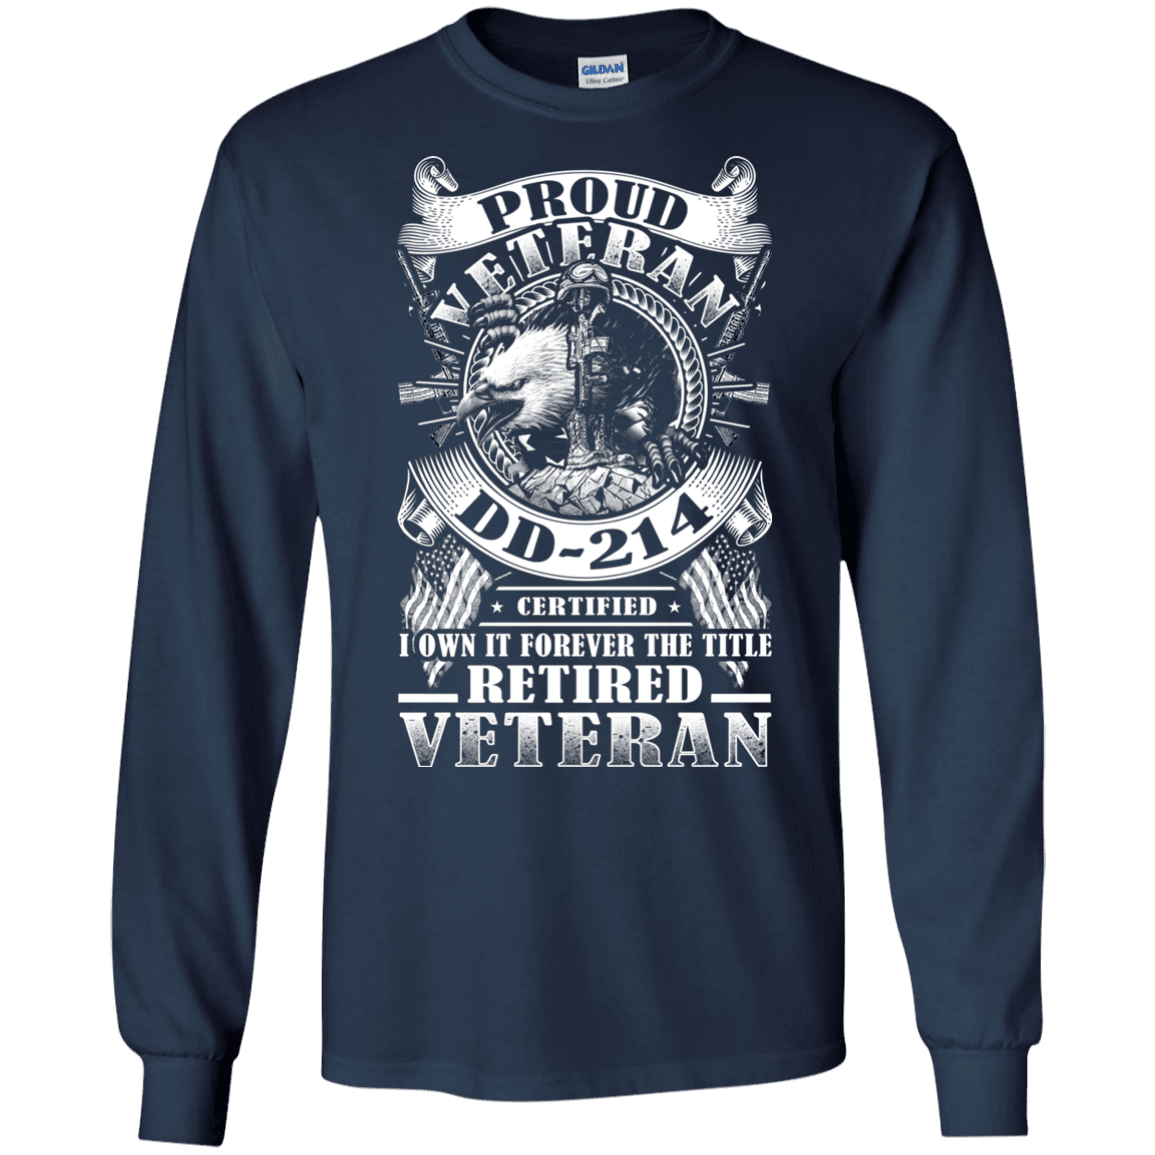 Military T-Shirt "Proud Veteran DD 214 with Title Retired Veteran" Front-TShirt-General-Veterans Nation